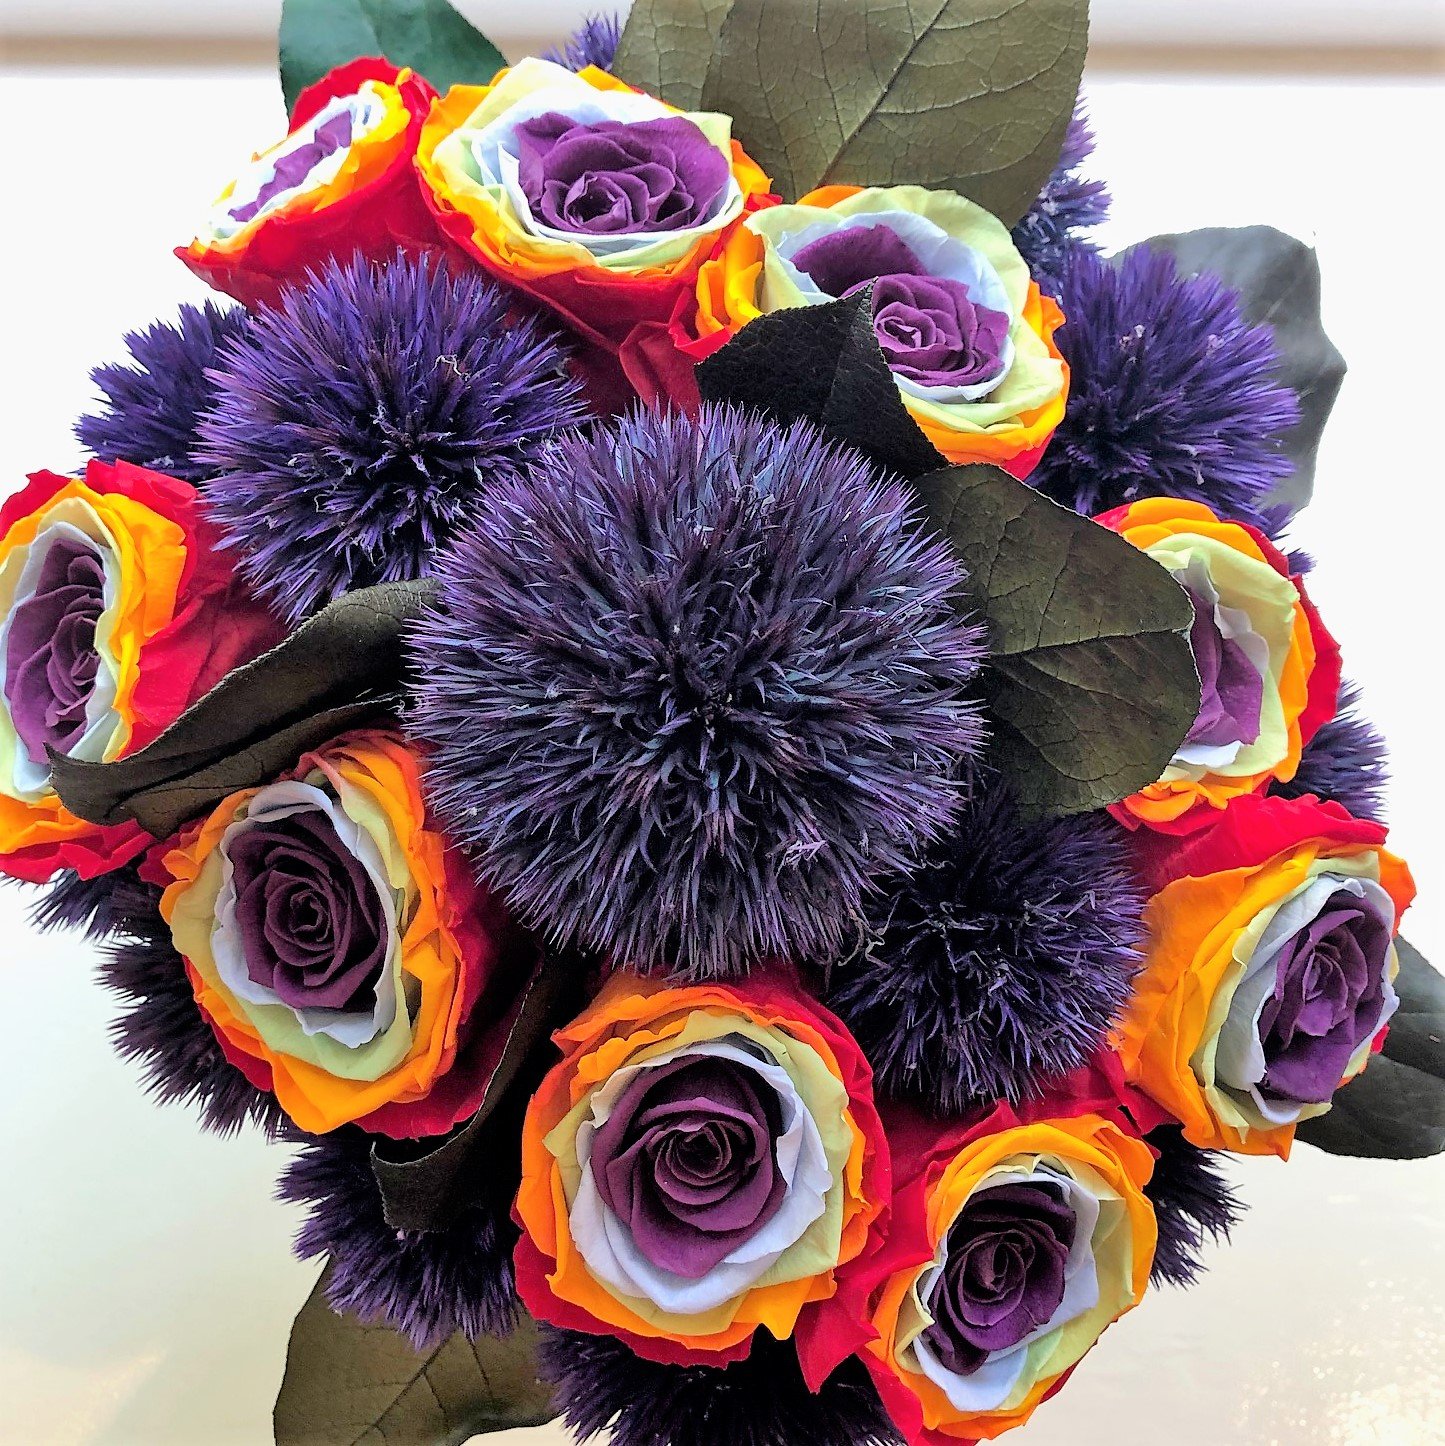 129 Rainbow roses with Giant thistle